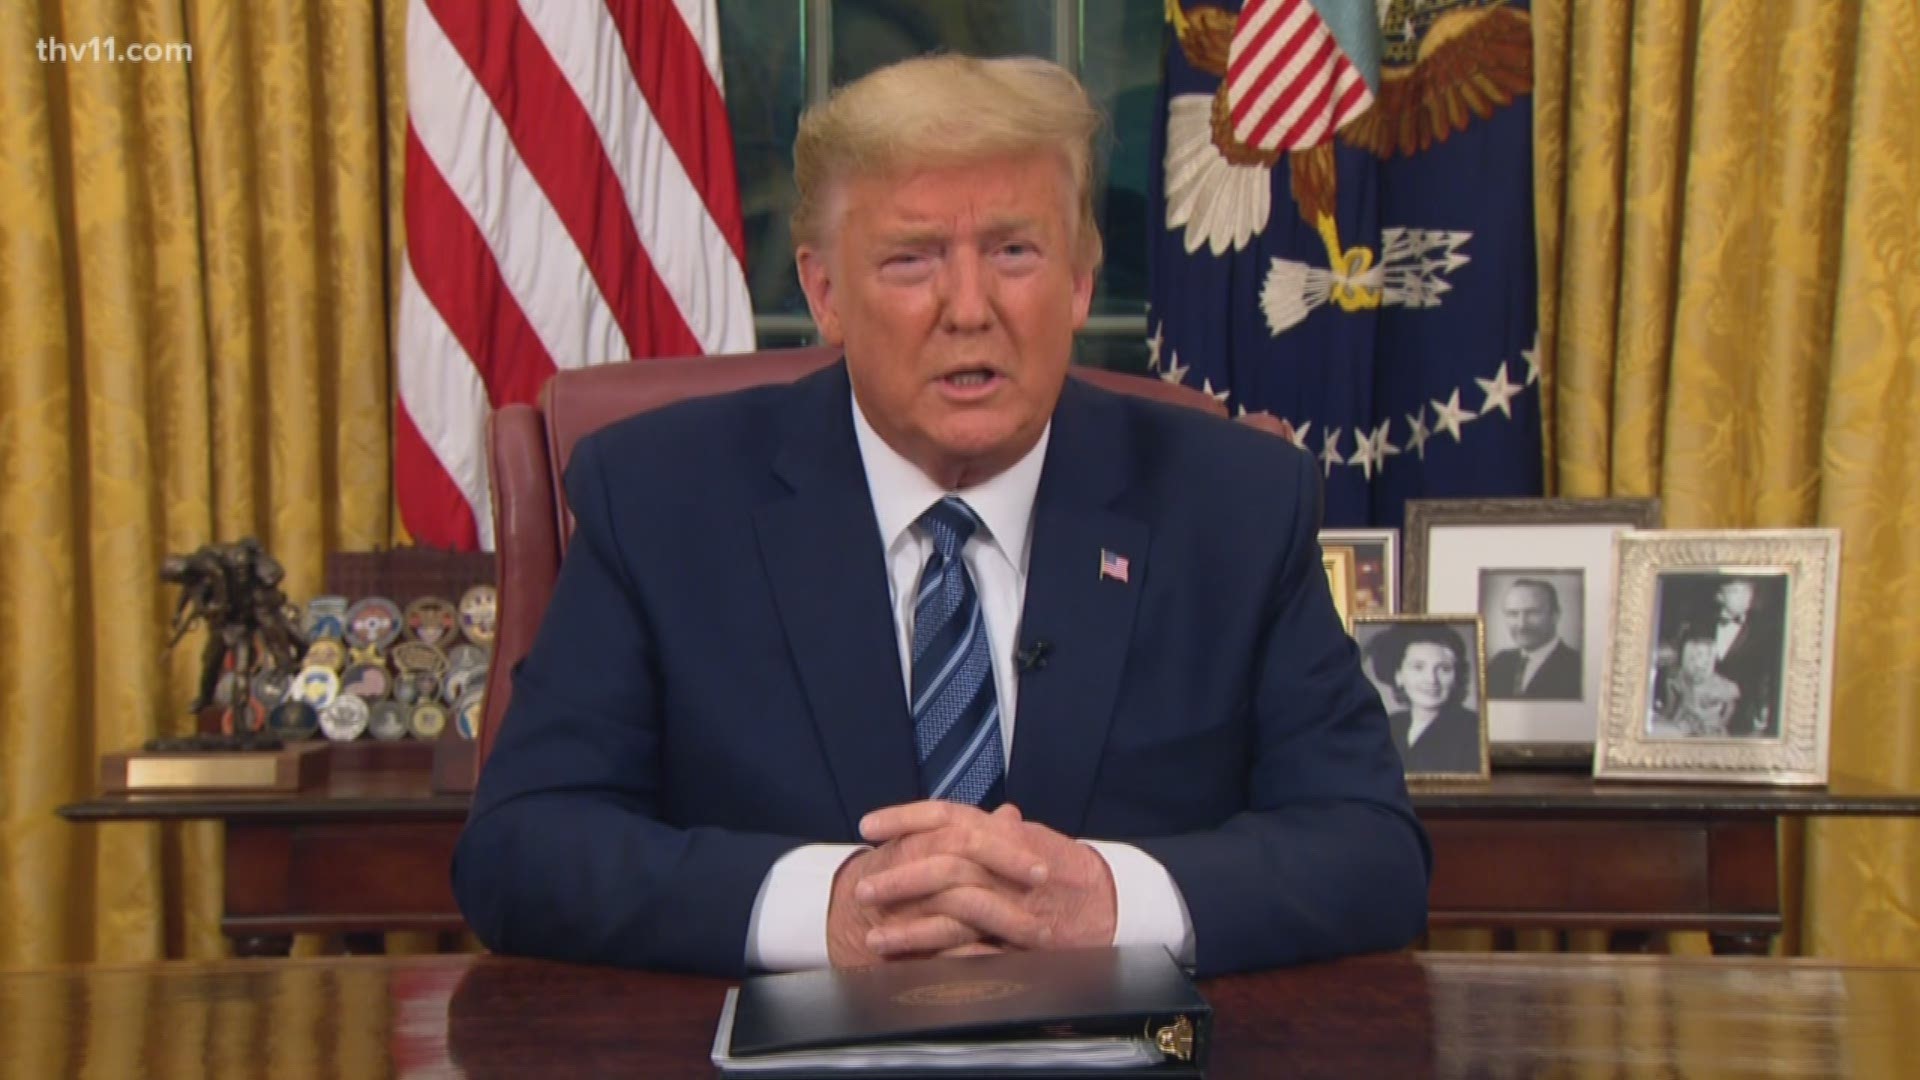 President Donald Trump addressed the nation on March 11, 2020, to lay out his plans on handling the spread of coronavirus throughout the country.